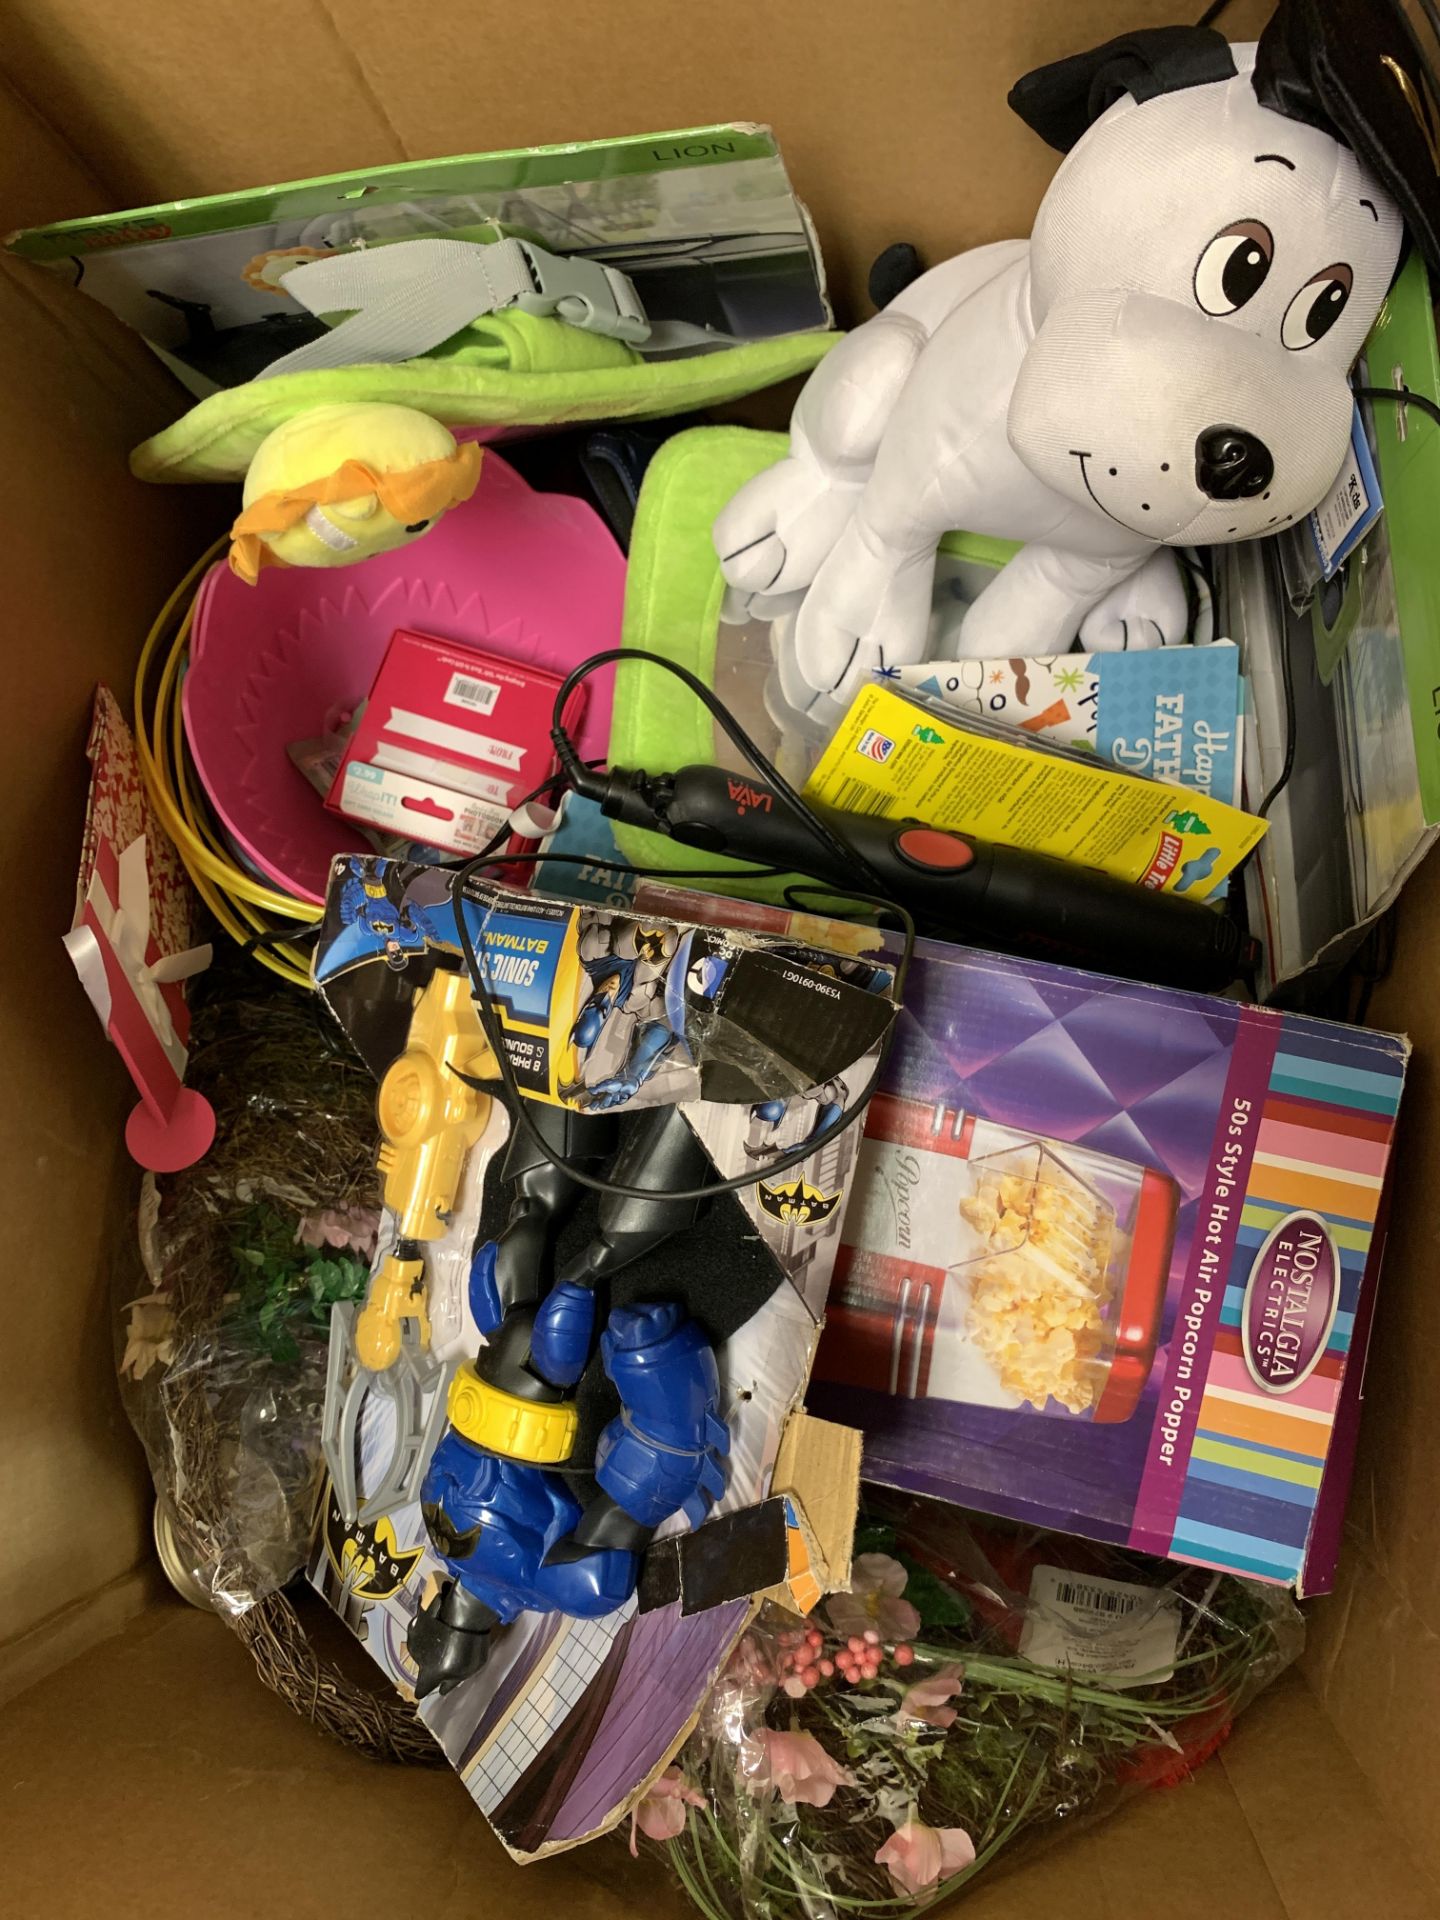 UNSORTED MIXED BOX OF MISC TOYS & OTHER ITEMS. ABOUT 1-2 FEET DEEP OF PRODUCT UNSORTED. "TOY BOX 2" - Image 2 of 2